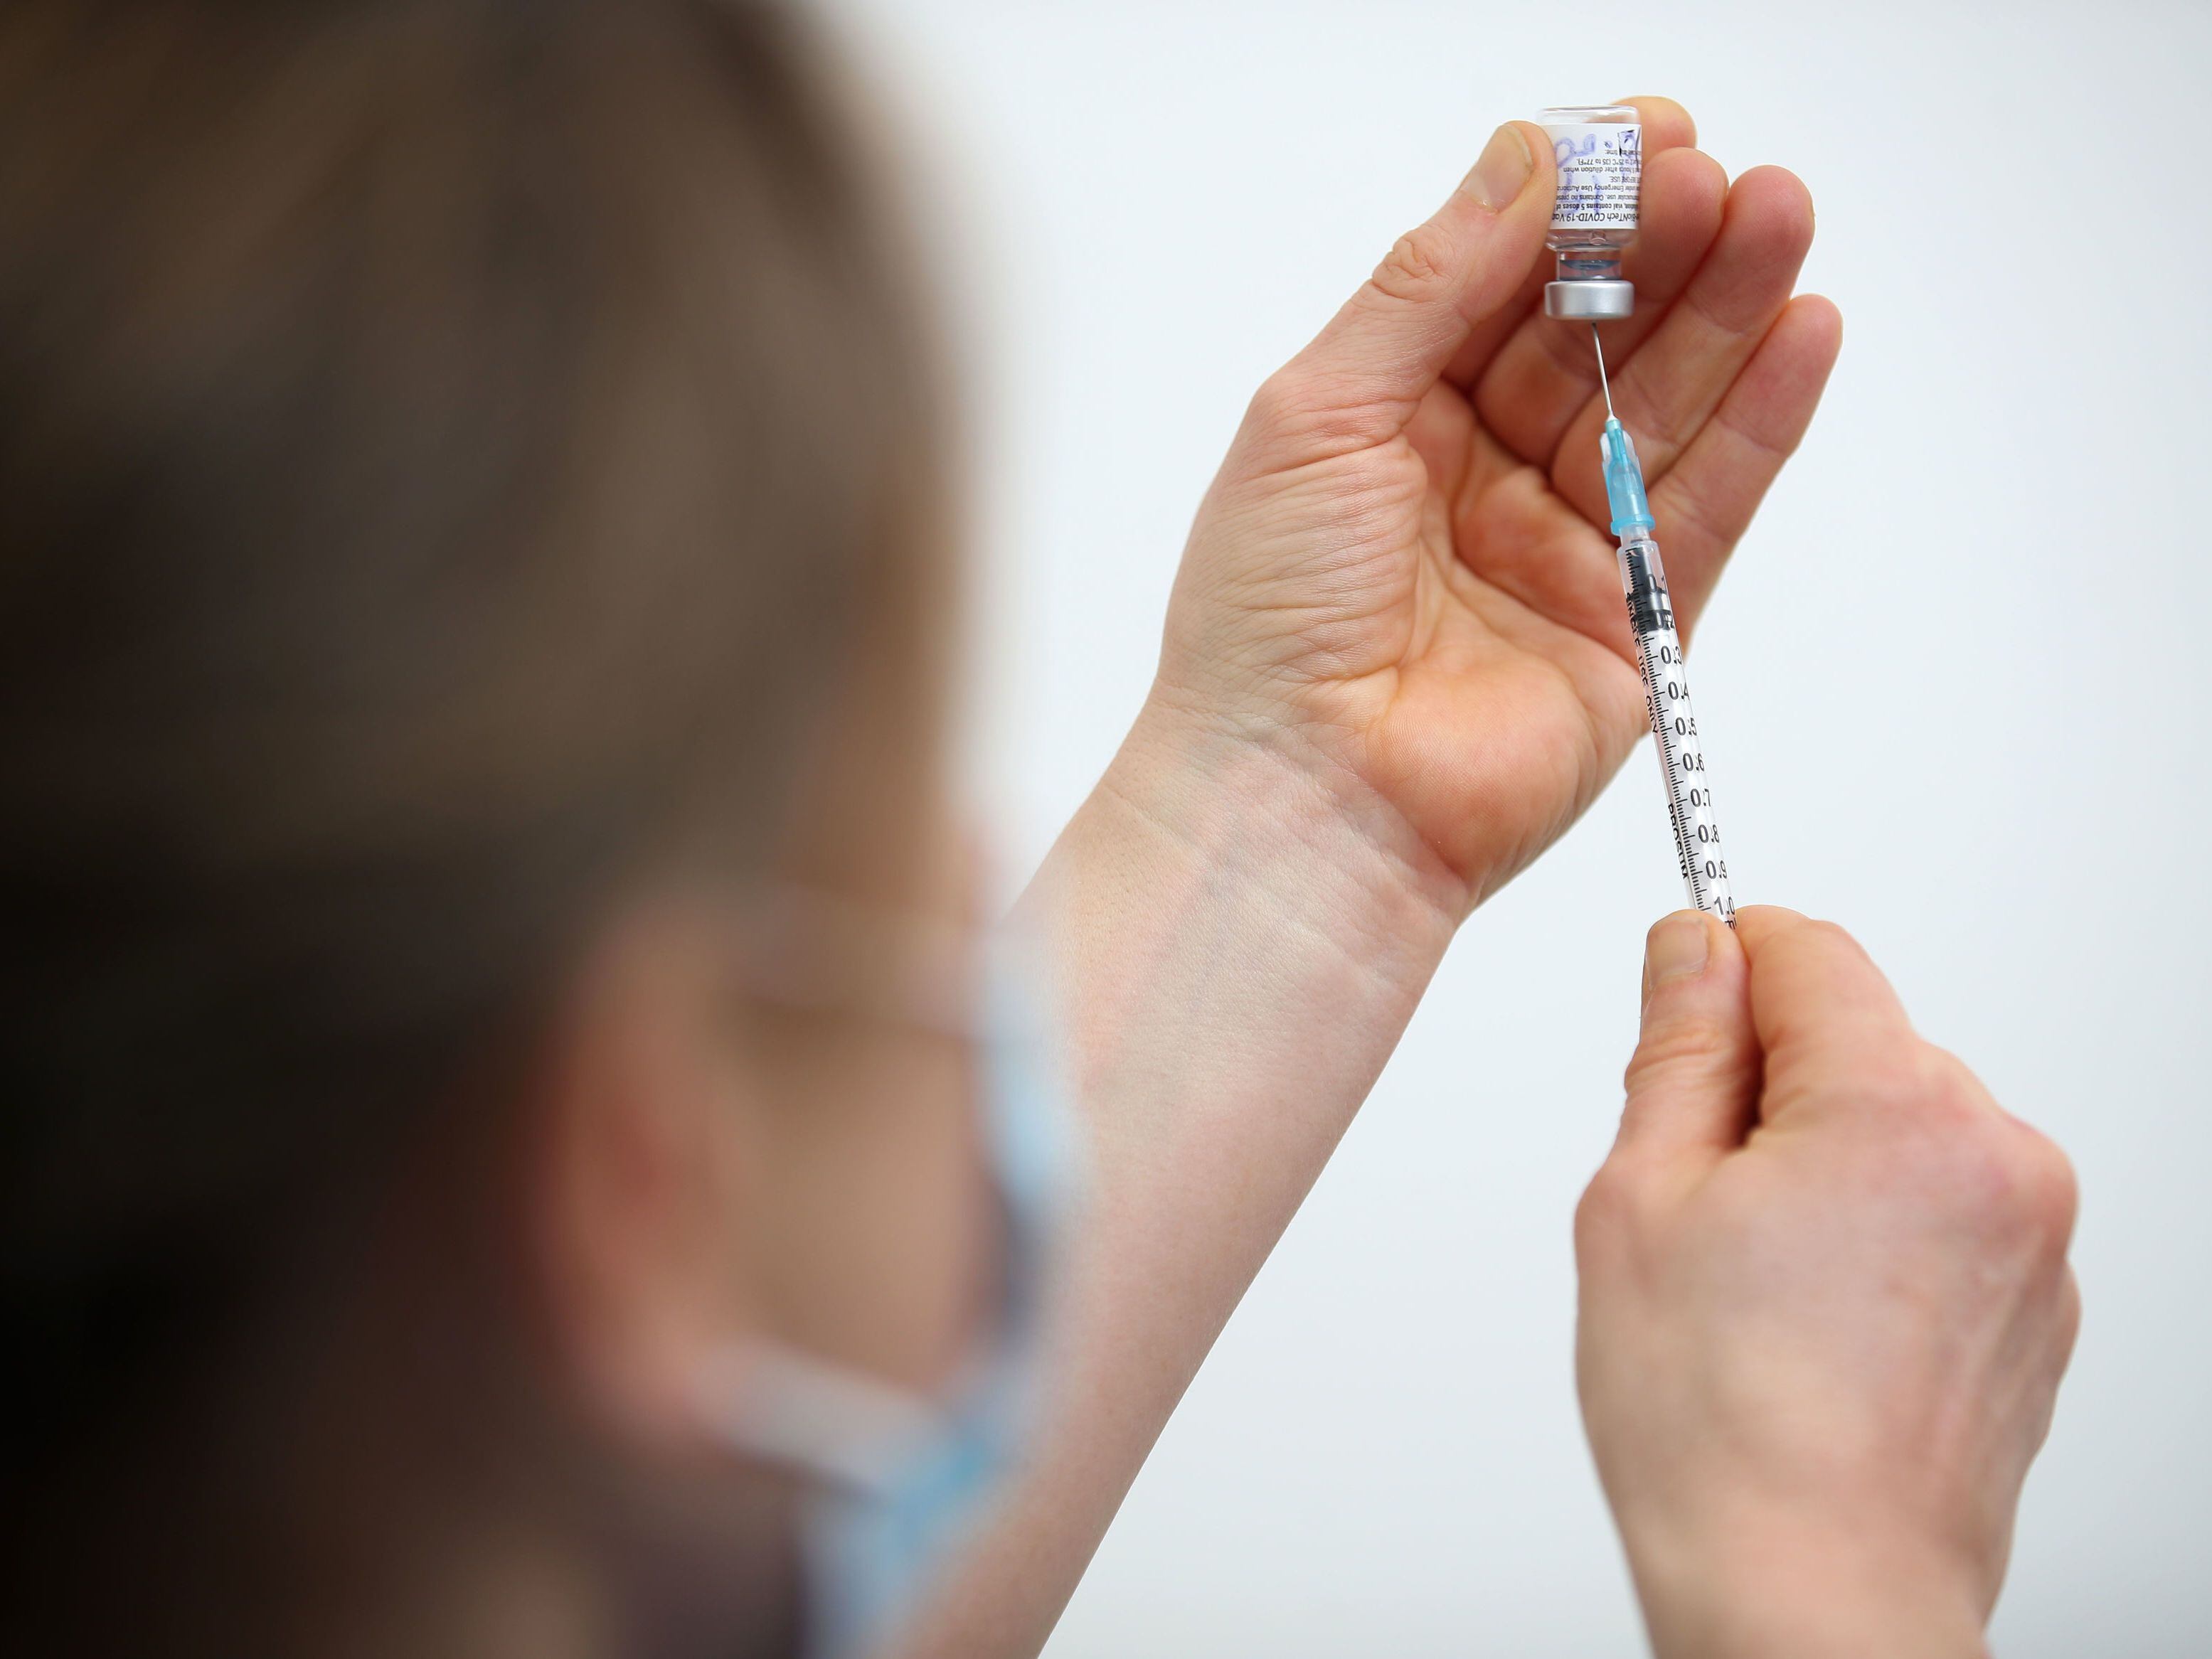 Latest roll-out of Covid vaccination set to take place